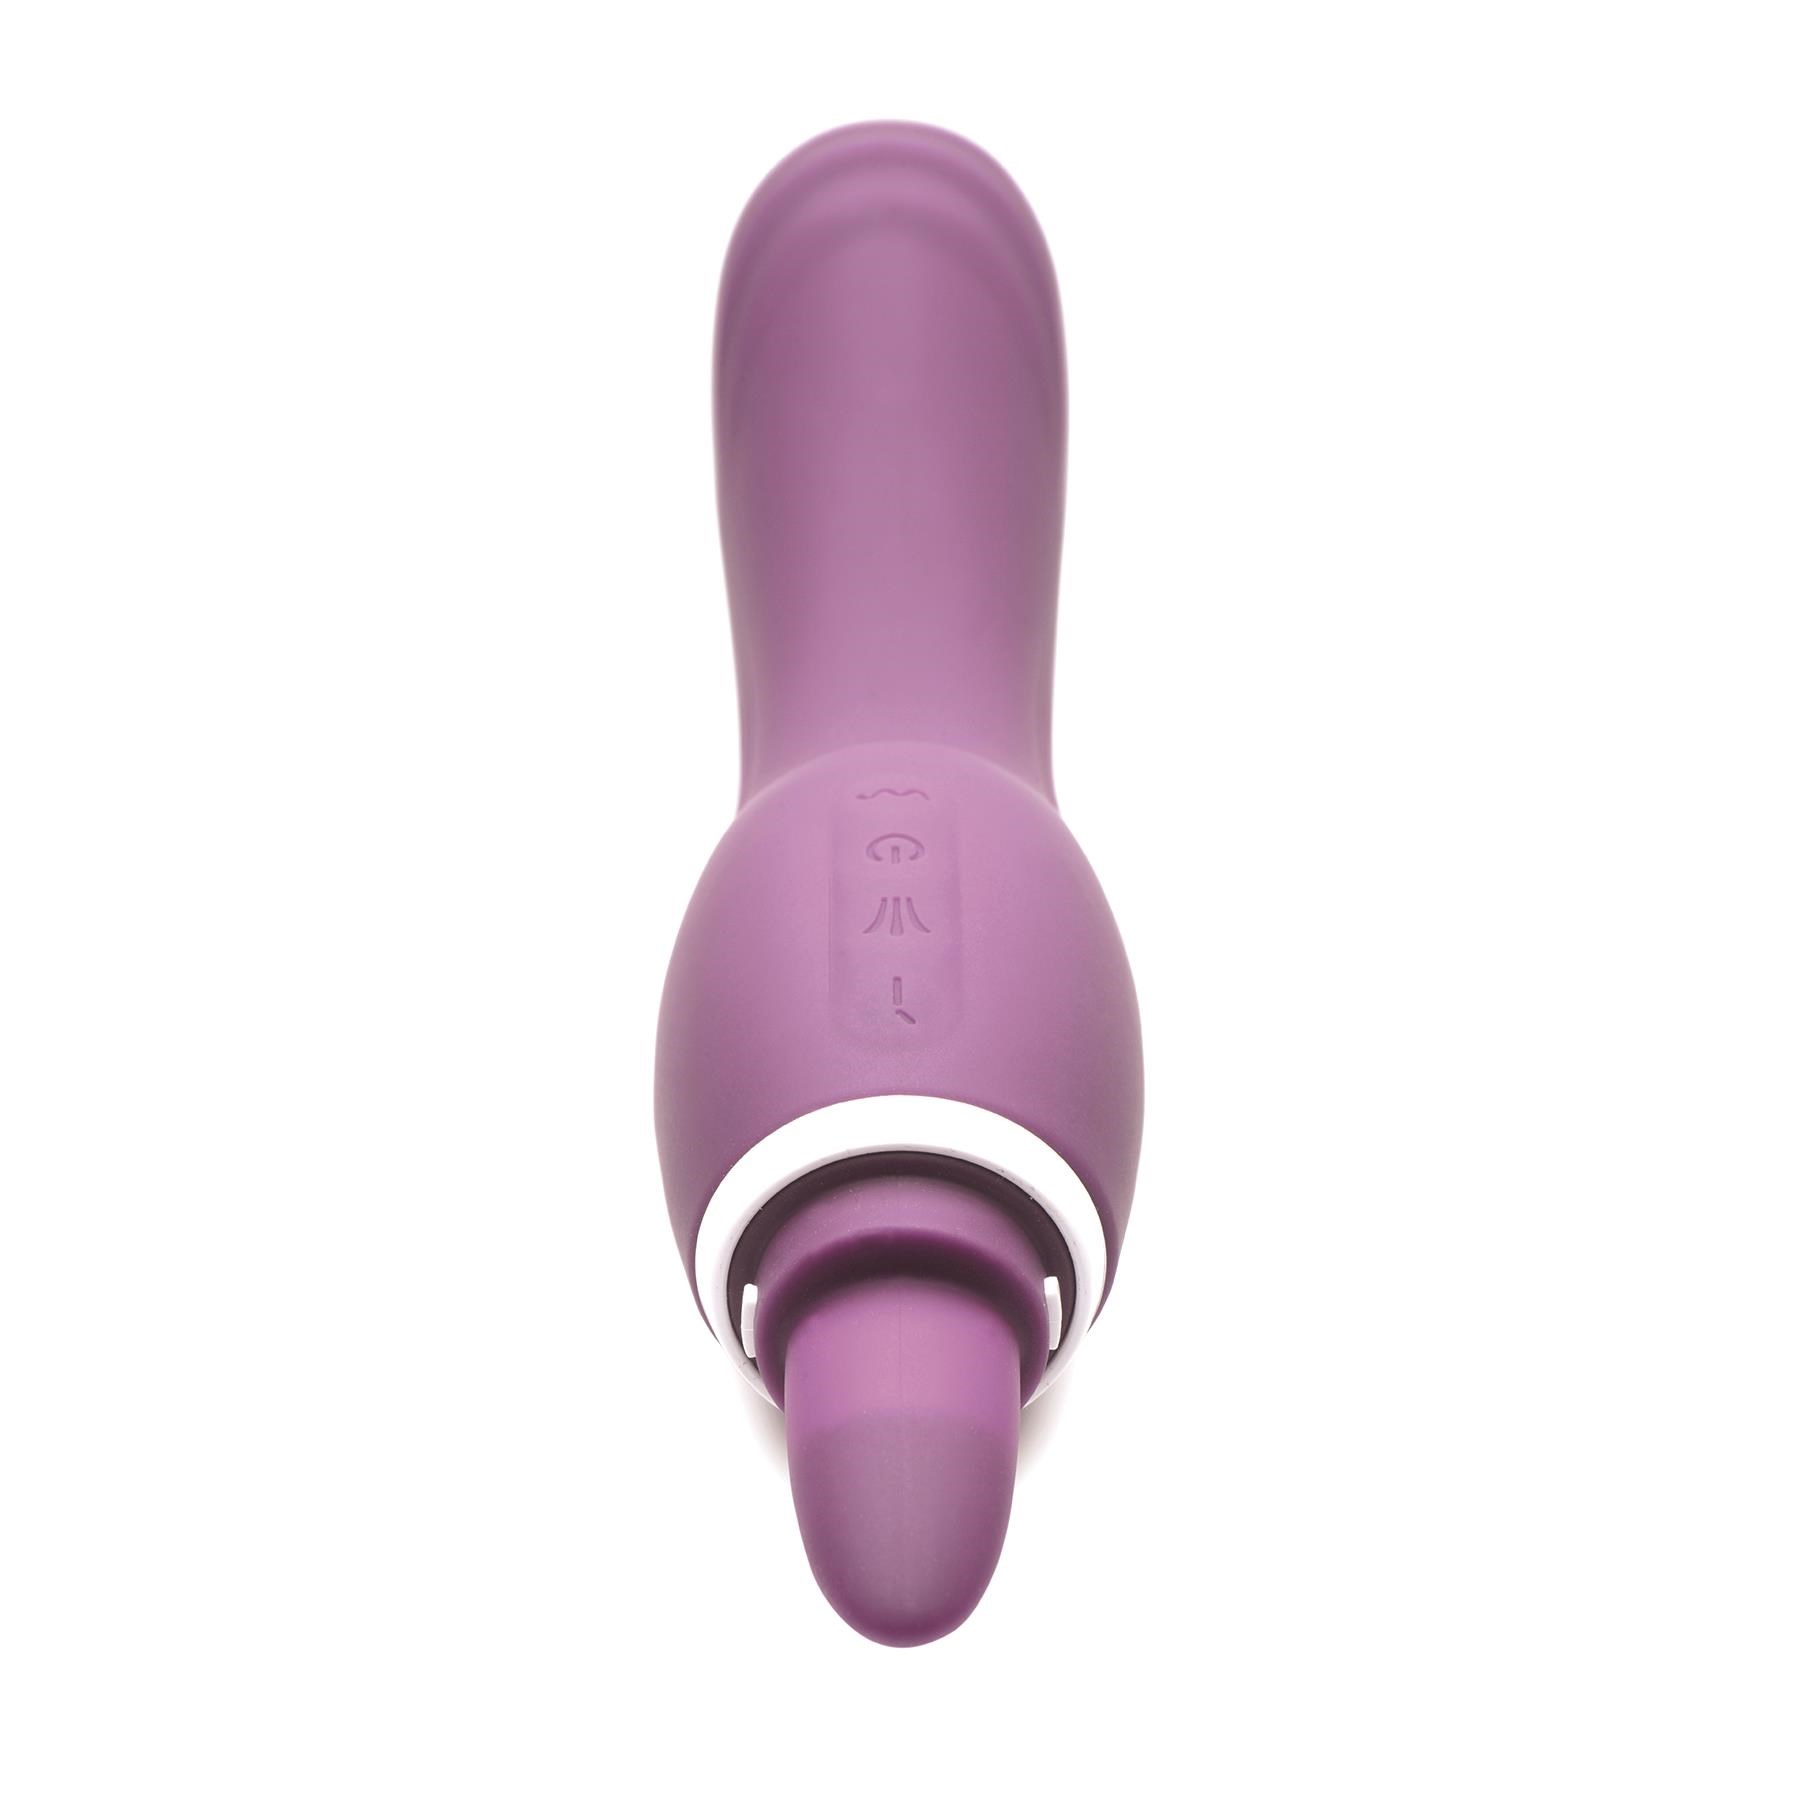 Shegasm Lickgasm Vibrating Pussy Pump - Product Shot without Cups #1